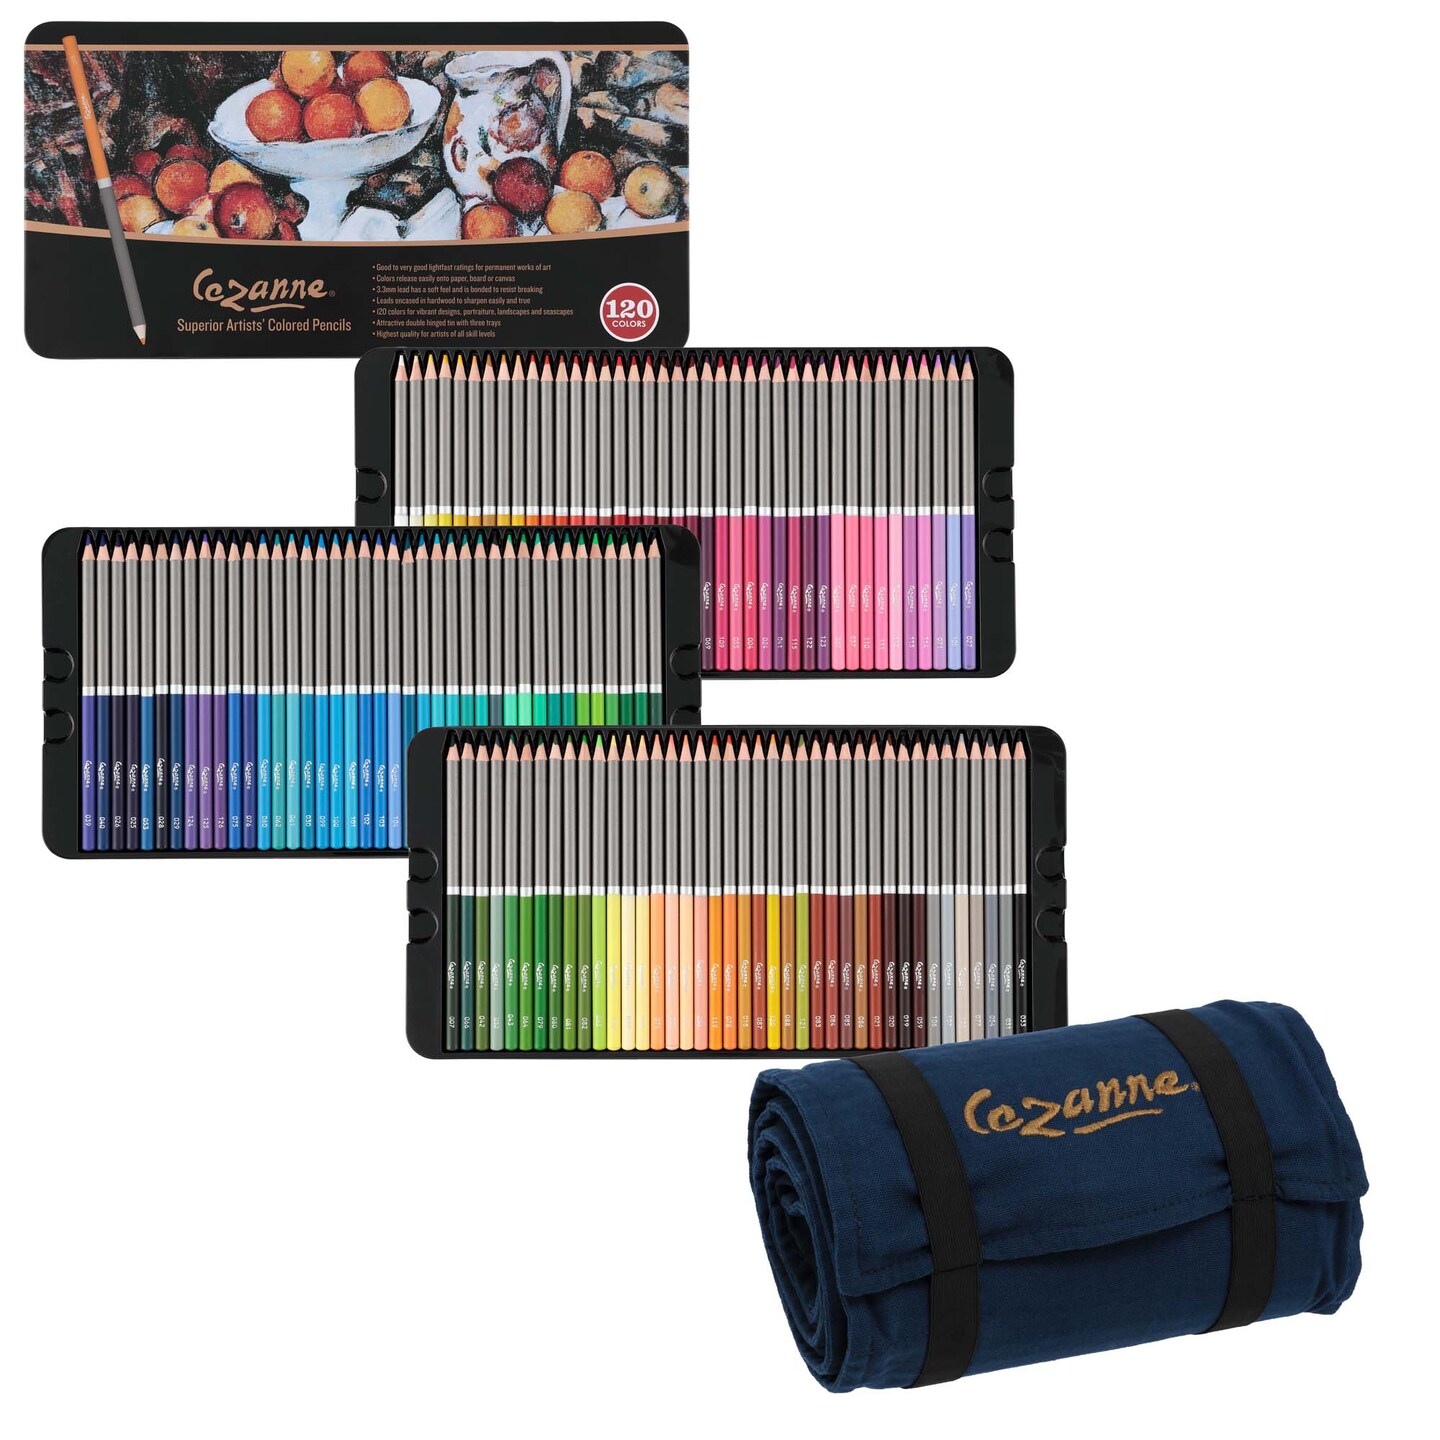 Cezanne Sets of Professional Colored Pencils with Canvas Roll-Up Case - Premium, High Pigment Colored Pencils, 3.3mm Diameter Lead and Storage Case with Zipper Pouch